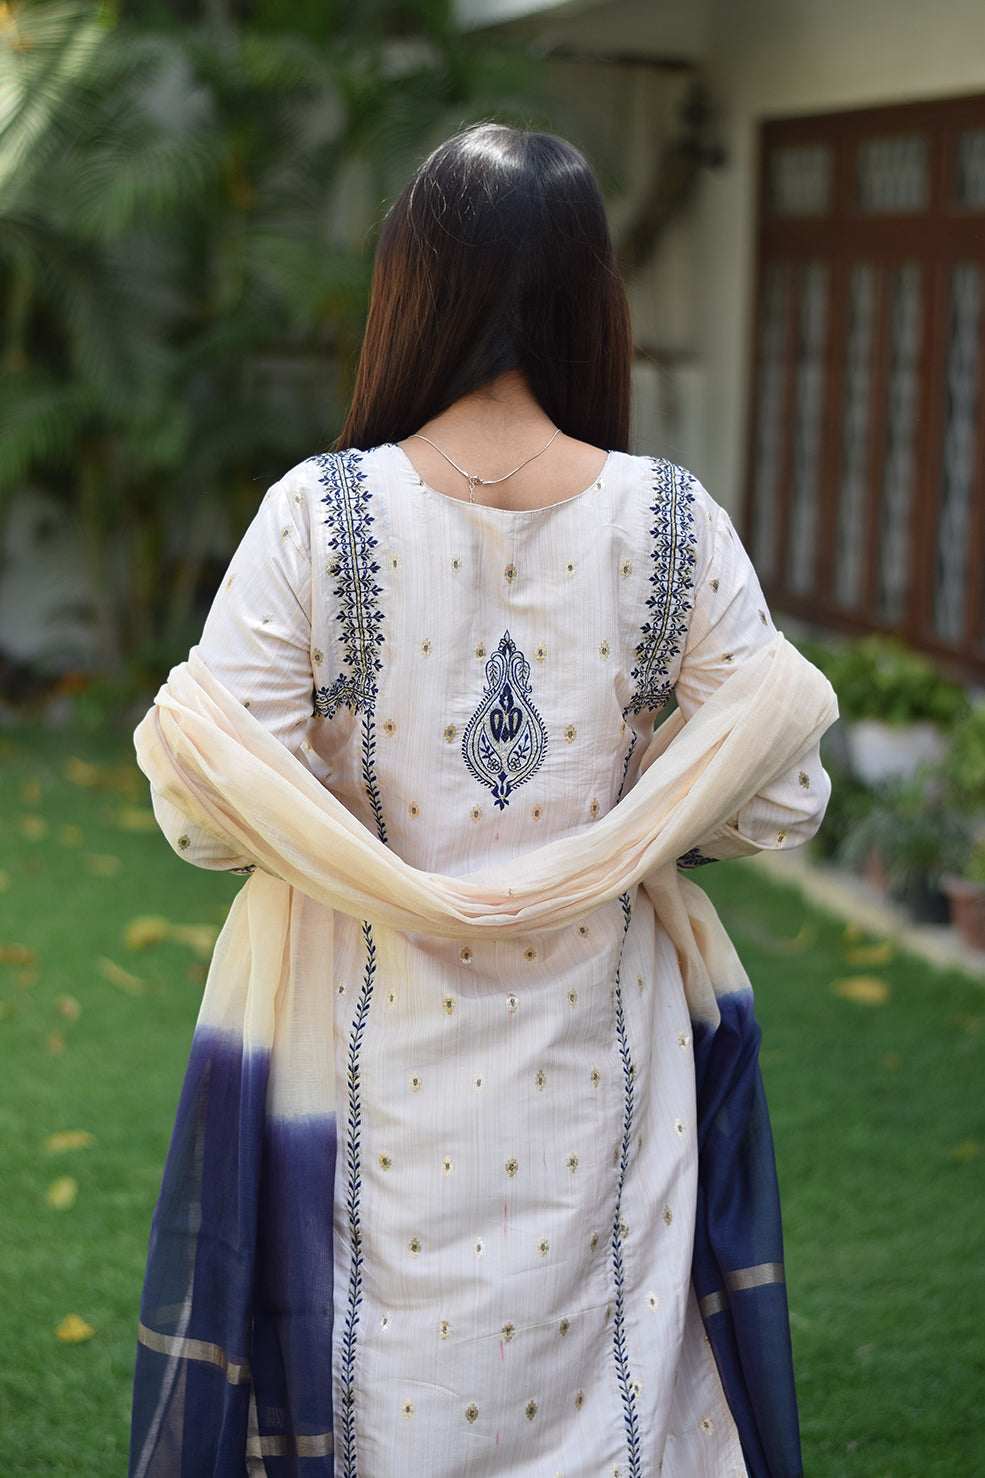 An image of an Indian woman in an Off-White Silk Kurta with stunning details and patterns.